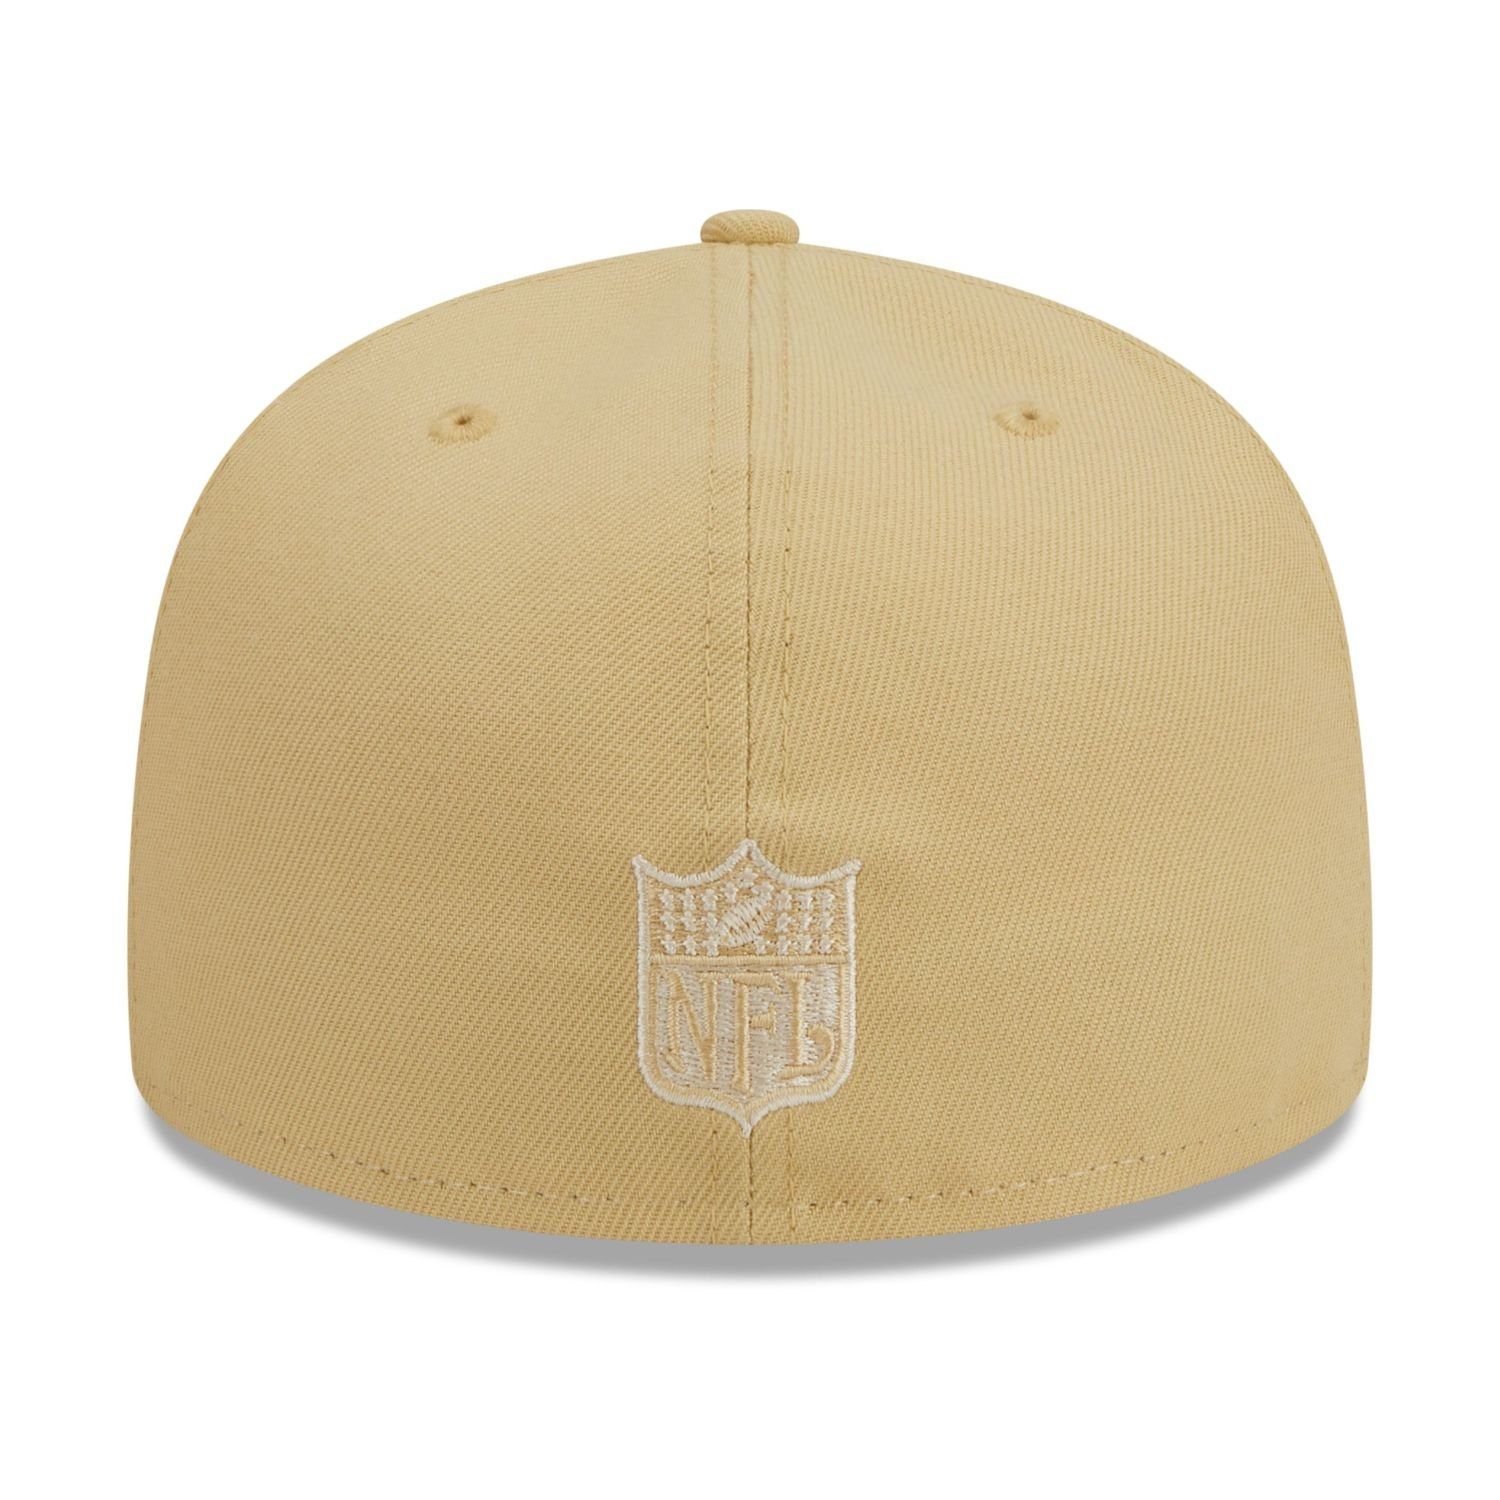 Era Los Cap Angeles 59Fifty New RAFFIA Rams Fitted